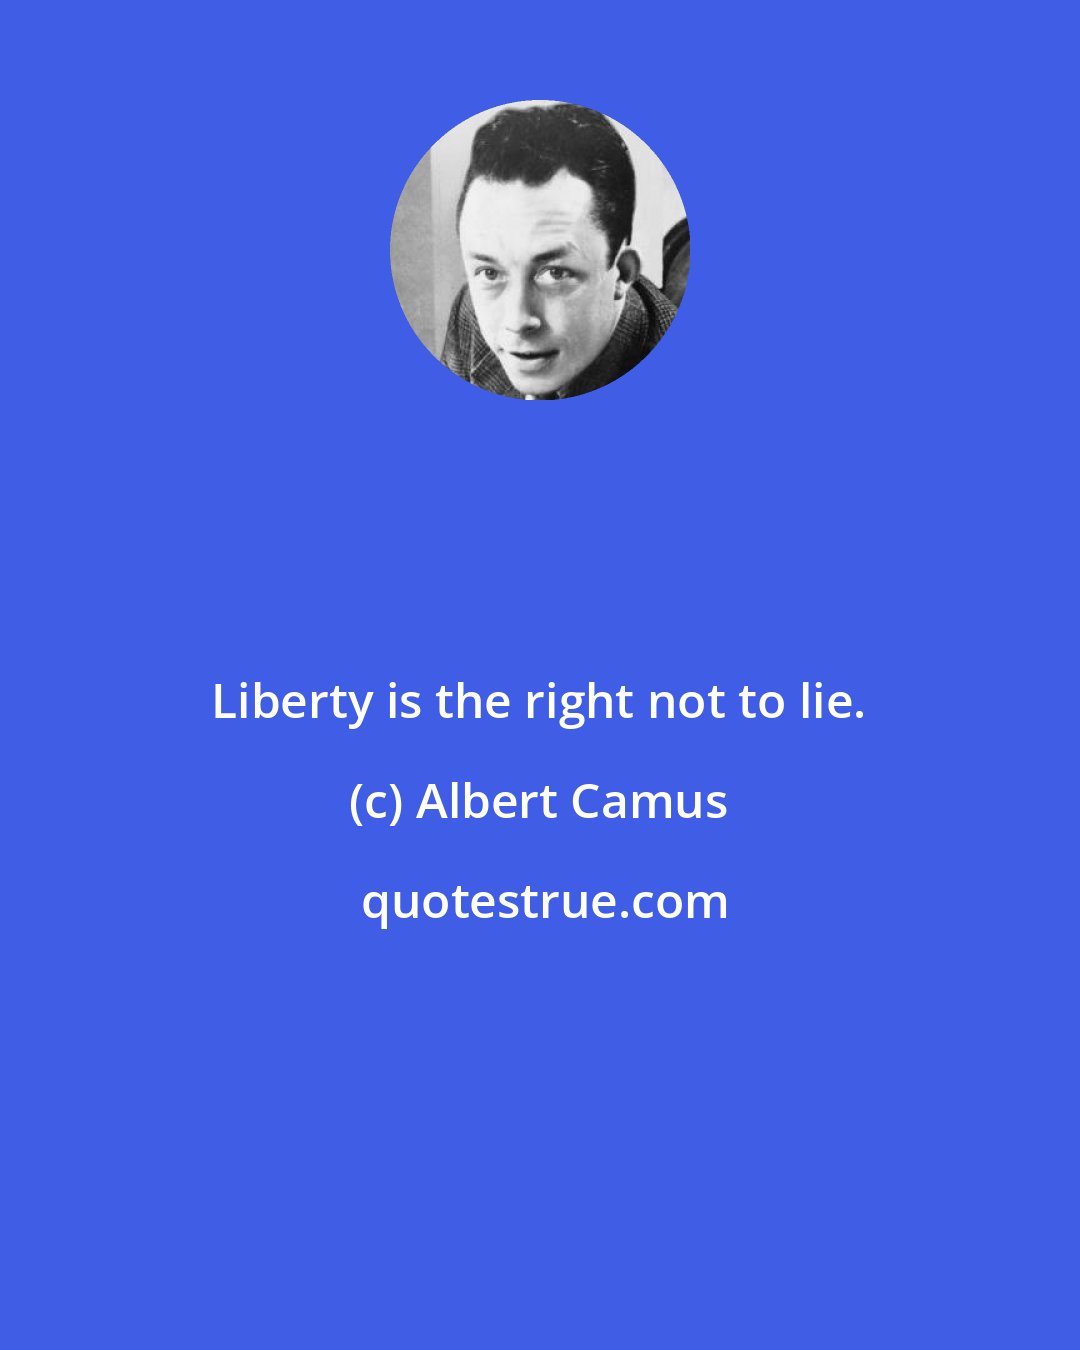 Albert Camus: Liberty is the right not to lie.